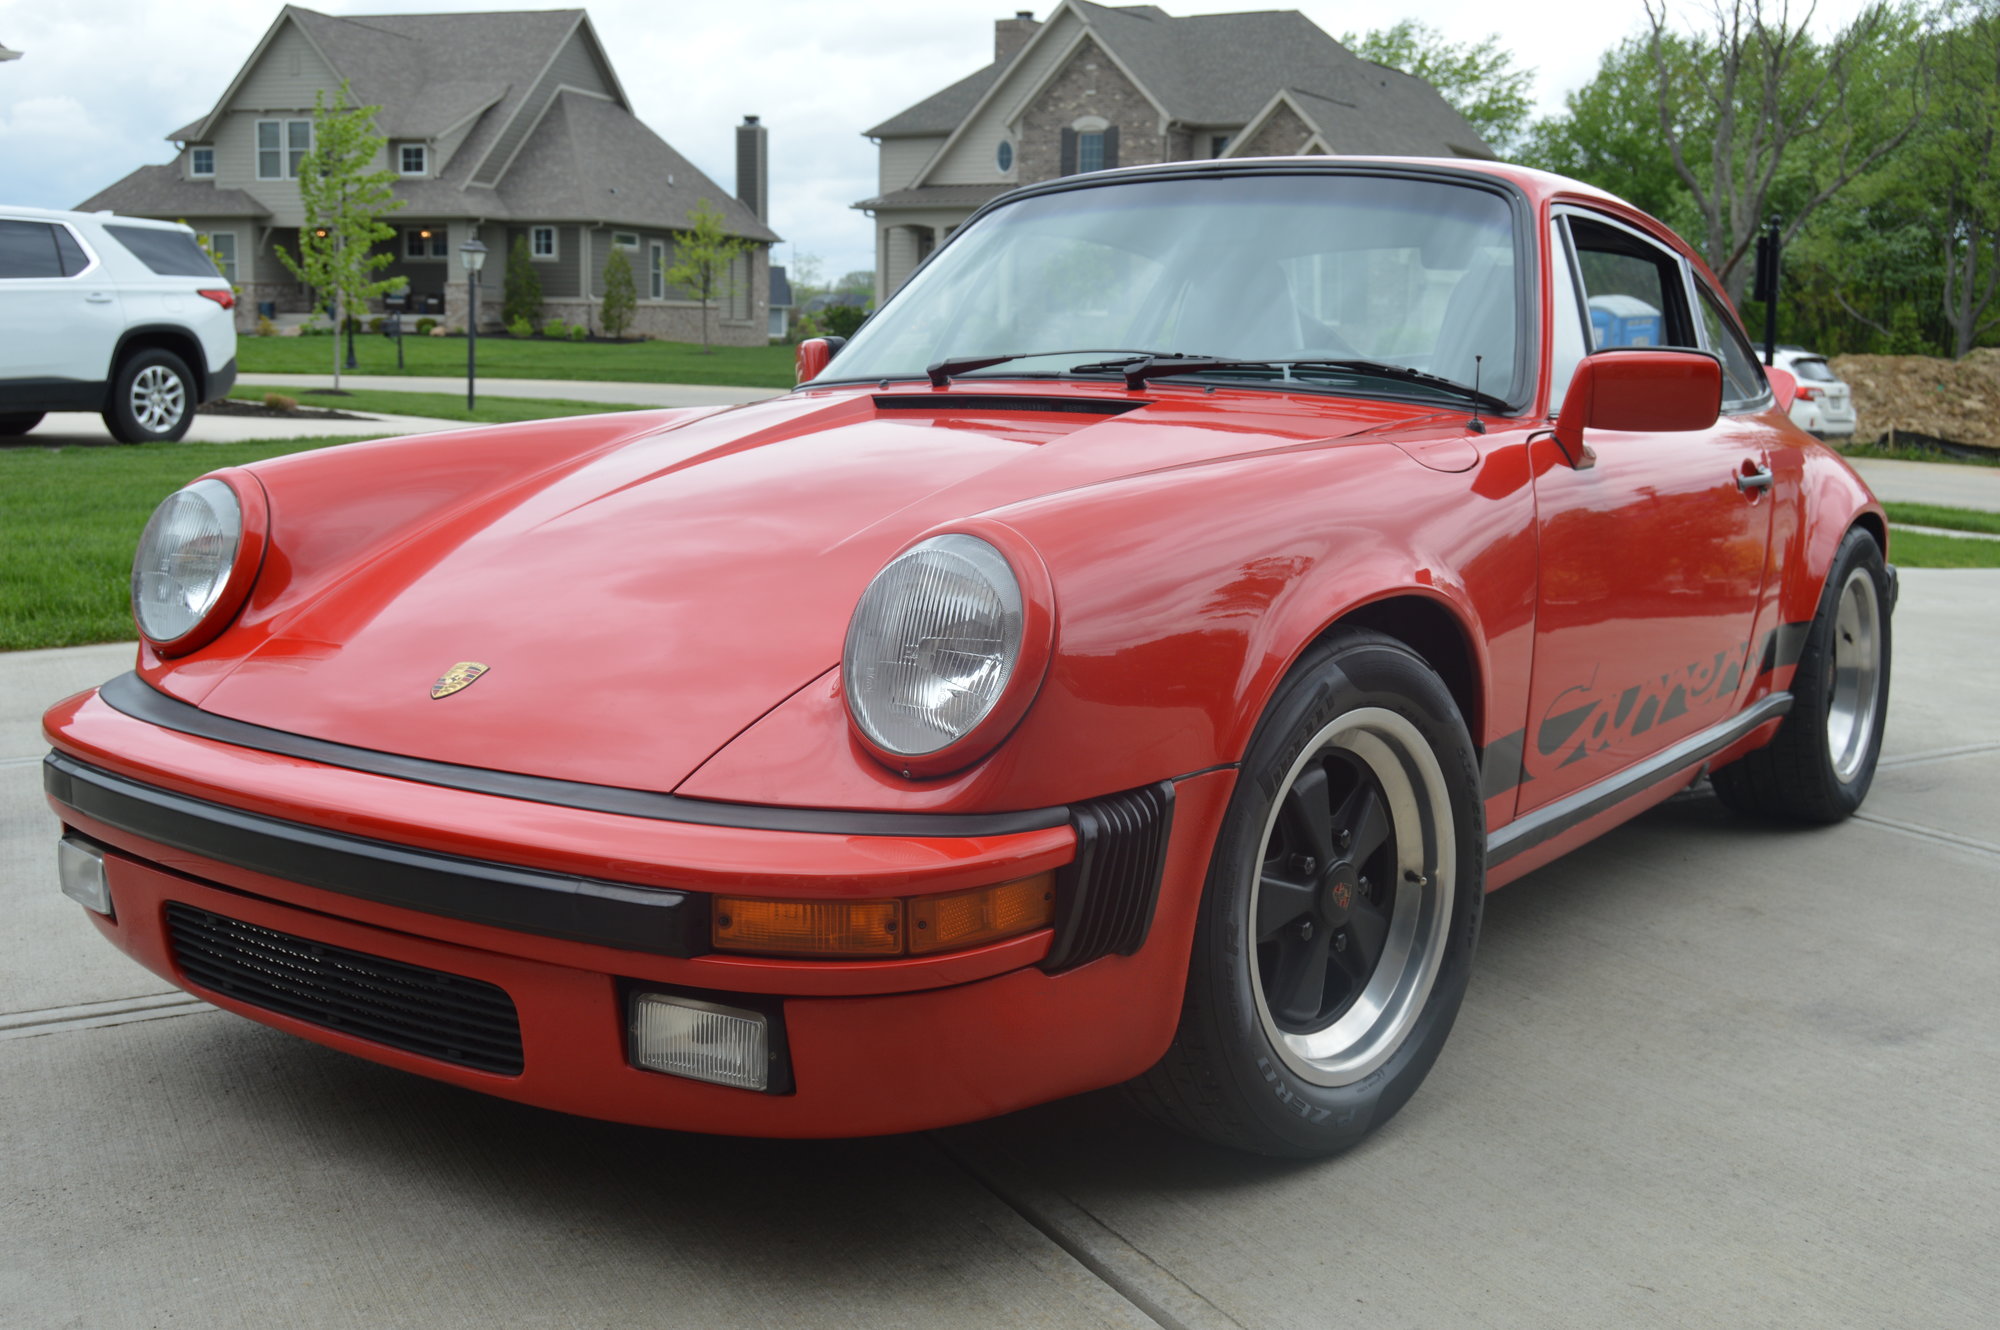 1980 Porsche 911 - Porsche 911 3.6L Outlaw - Used - VIN 91A0131033 - 6 cyl - 2WD - Manual - Coupe - Red - Carmel, IN 46033, United States